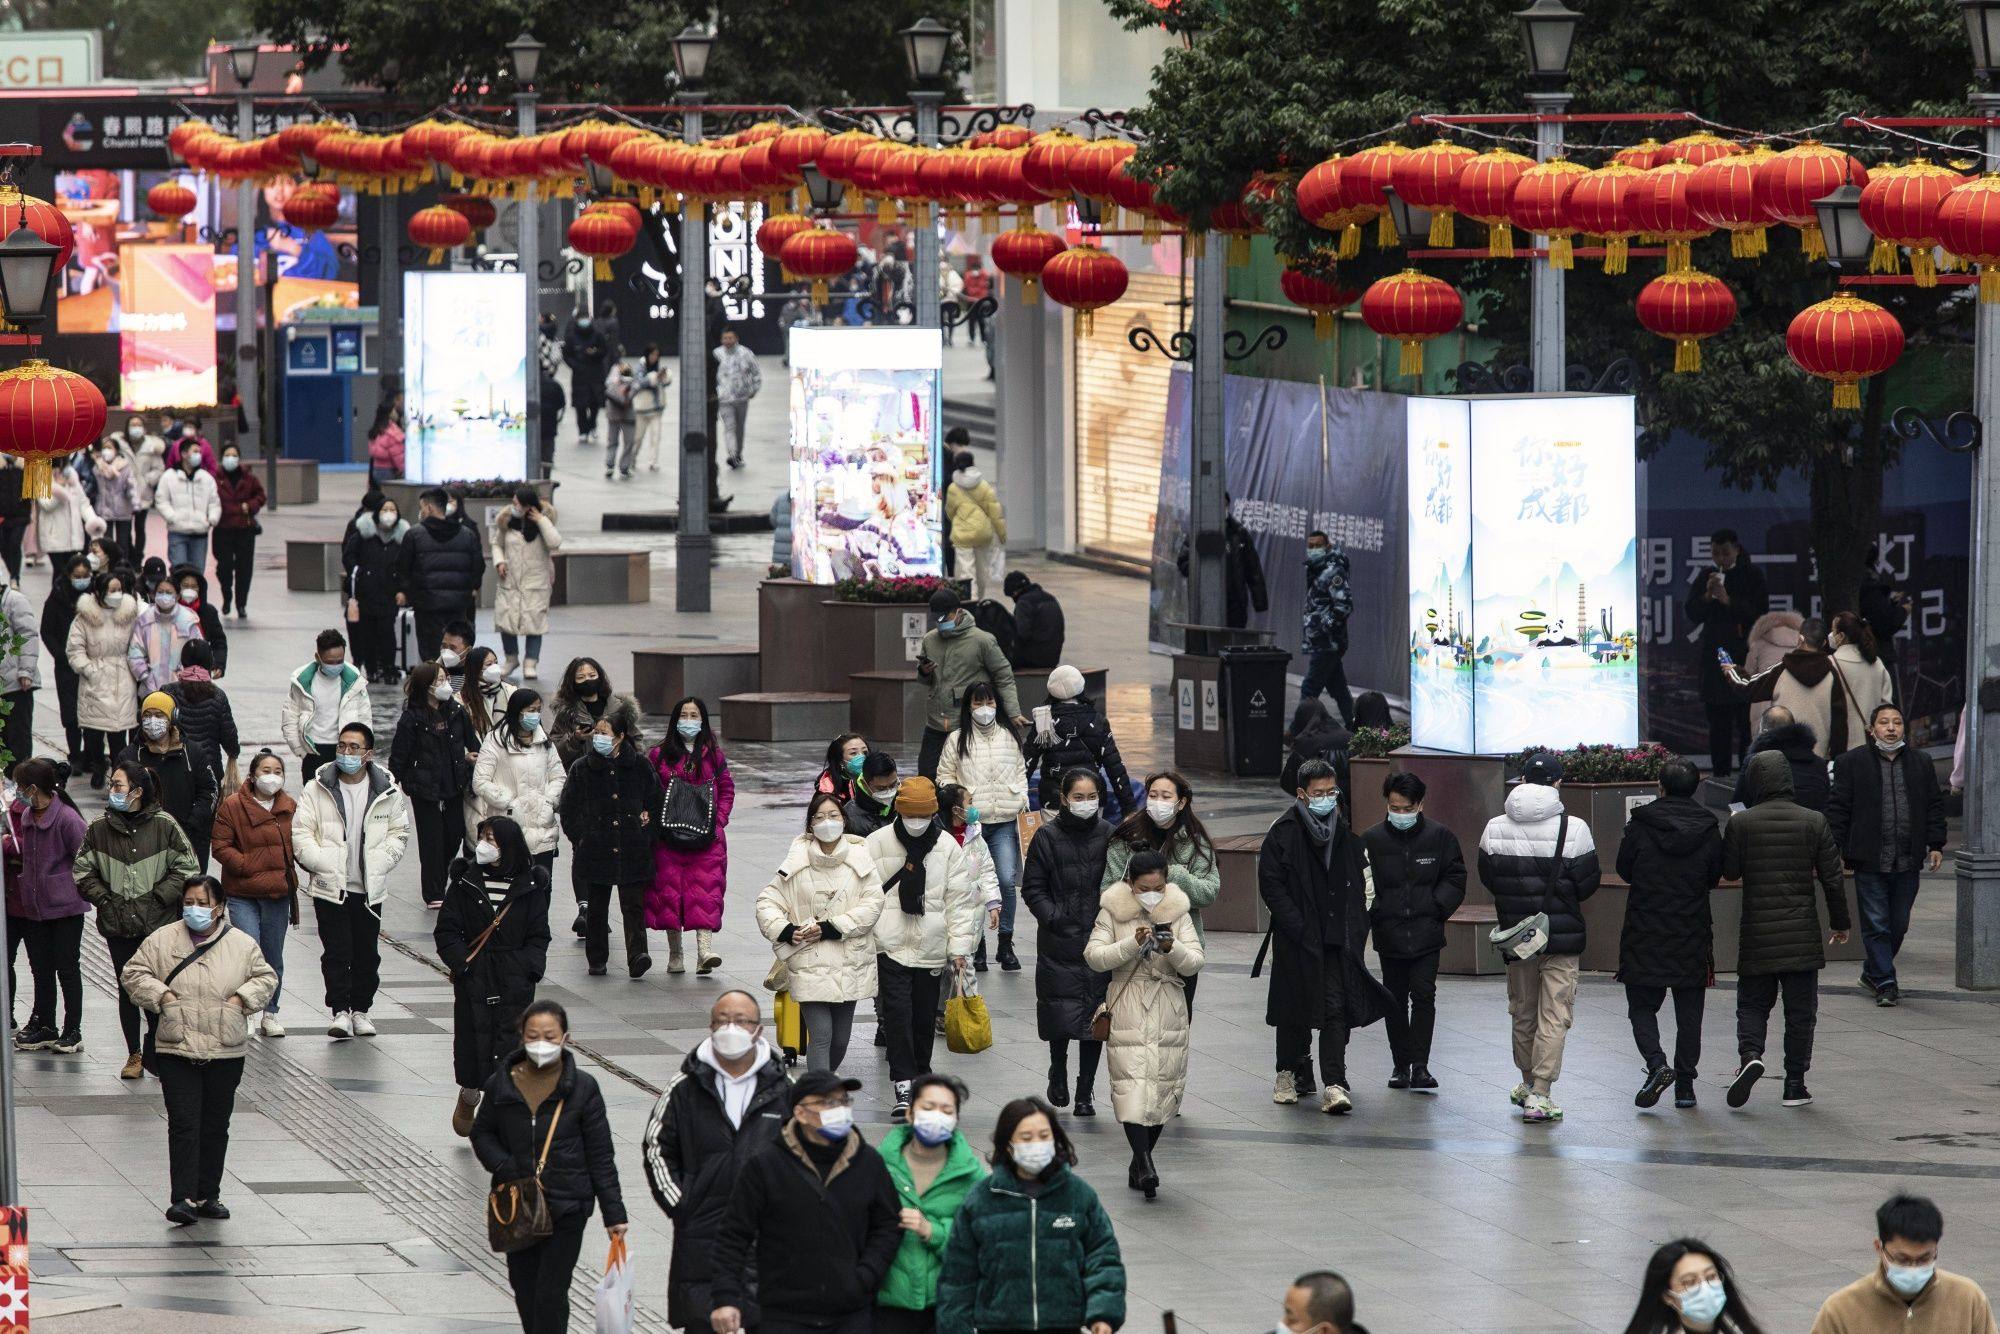 Fresh Covid outbreaks and weak confidence about income prospects are undermining Chinese consumption. Photo: Bloomberg